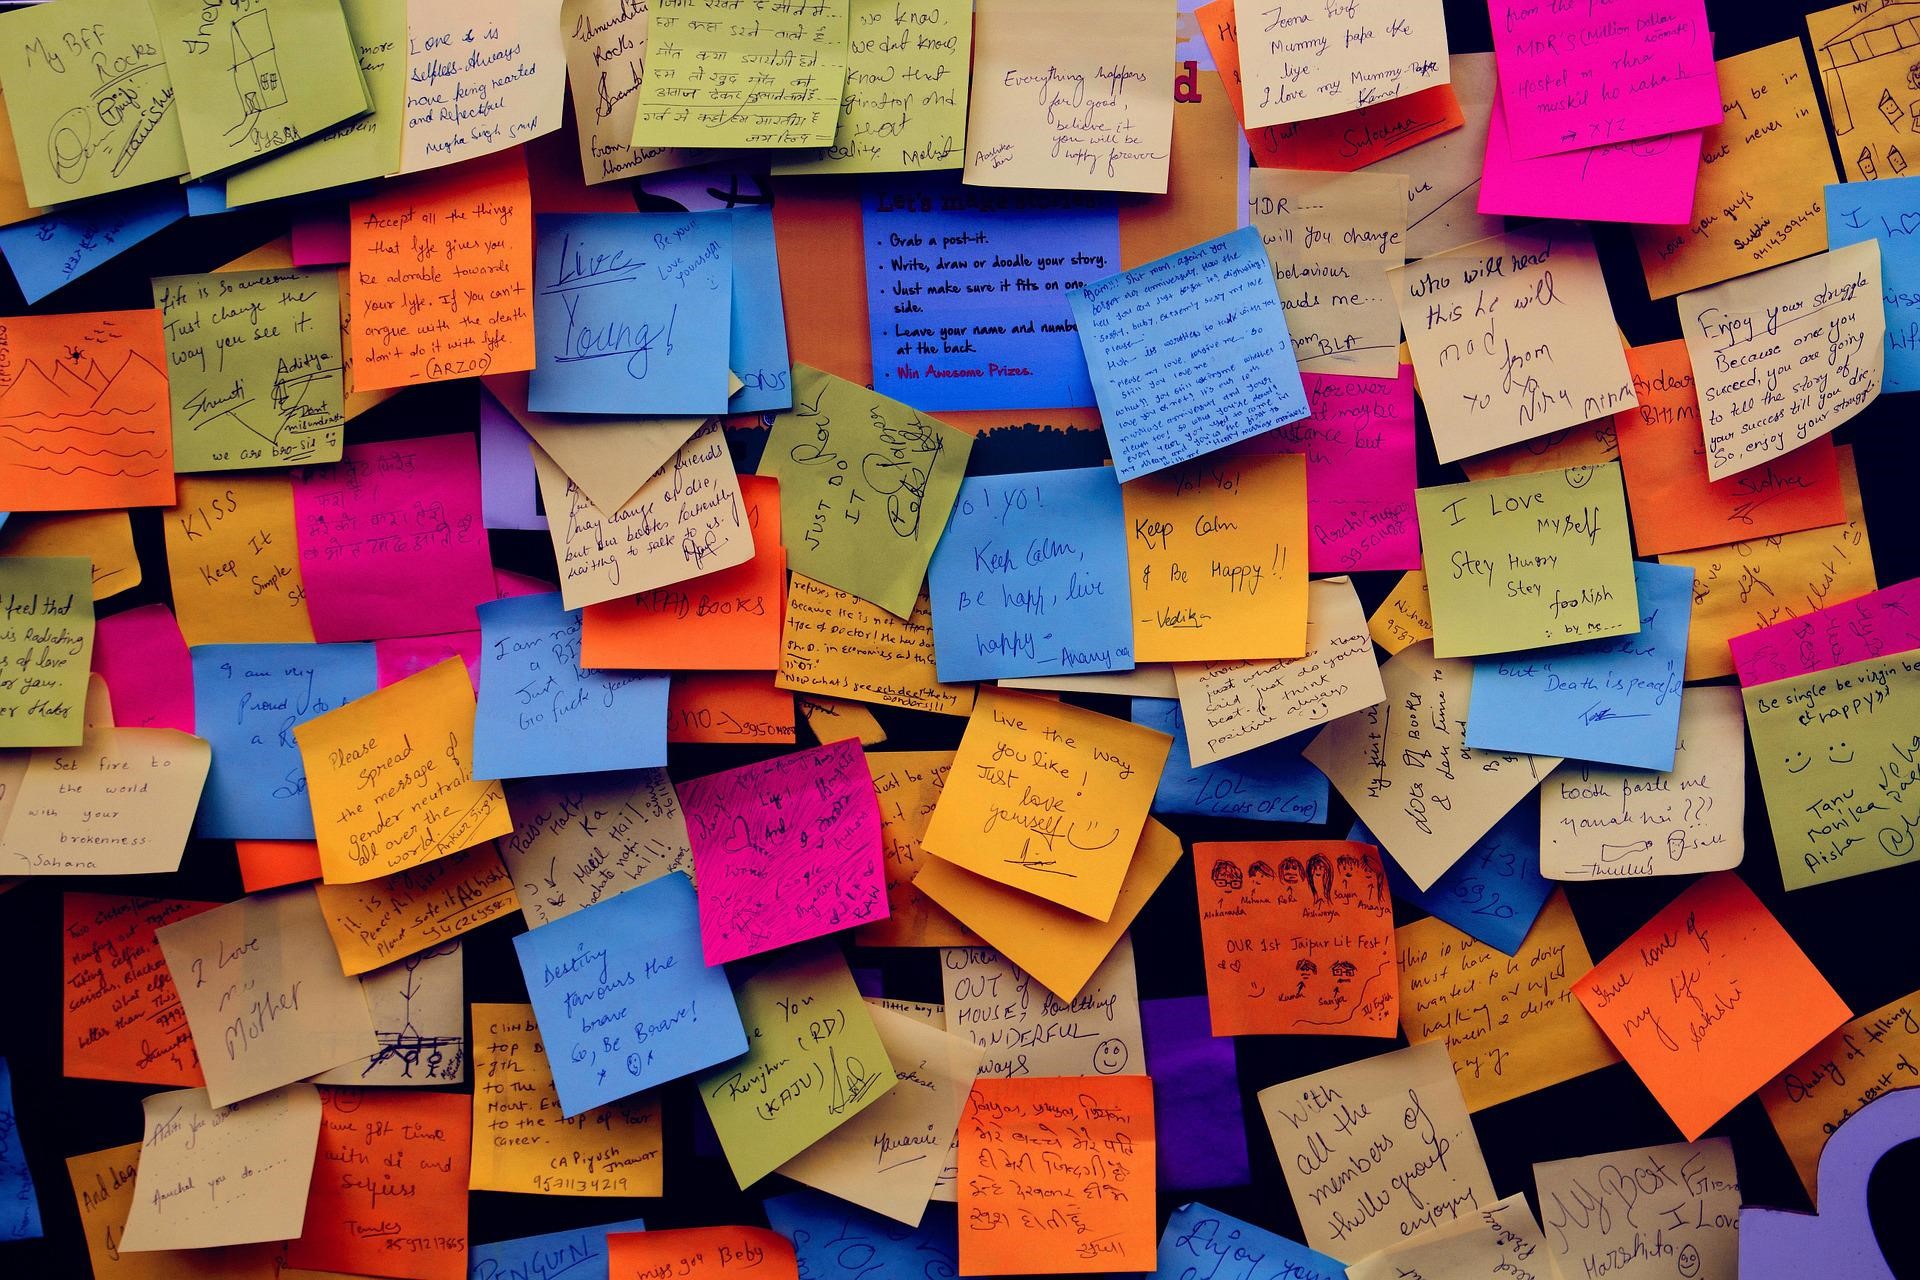 Post it notes boards